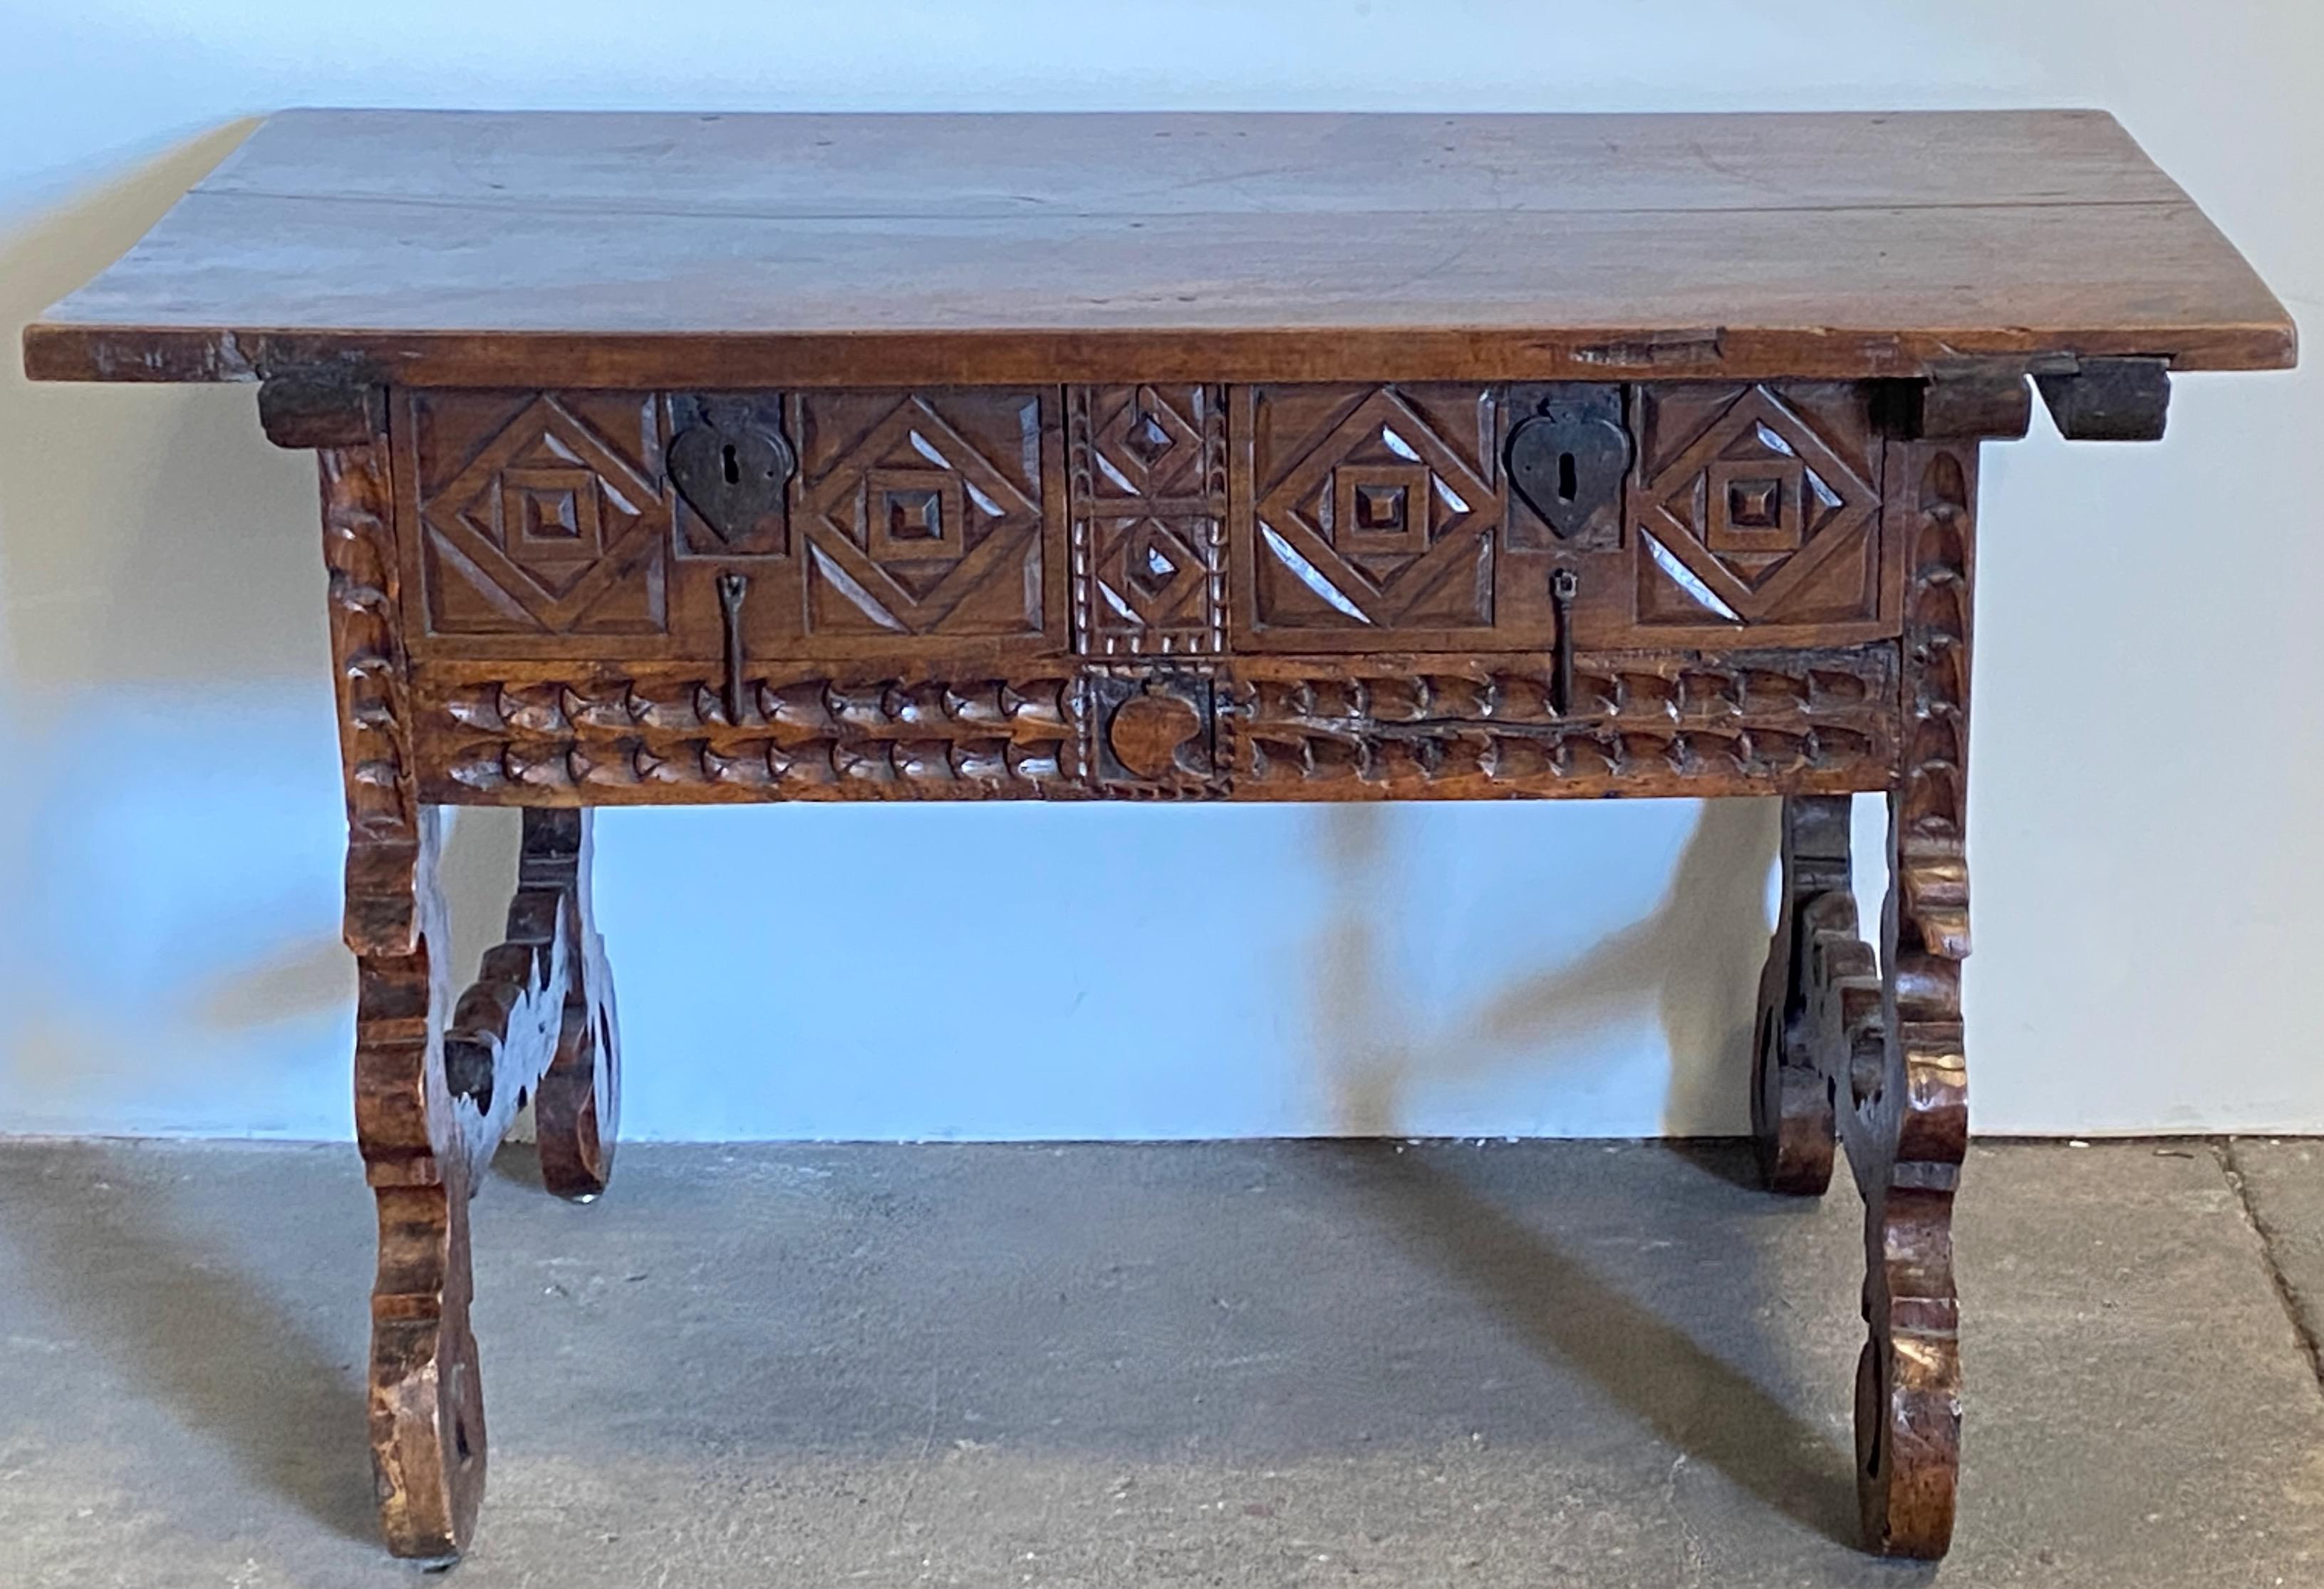 An exceptional carved walnut table with original iron pulls and lyre shape legs.
Having original carved frieze with nice deep double drawers.
This is an authentic period table in remarkable antique condition.
Spain, Early to Mid-18th Century.